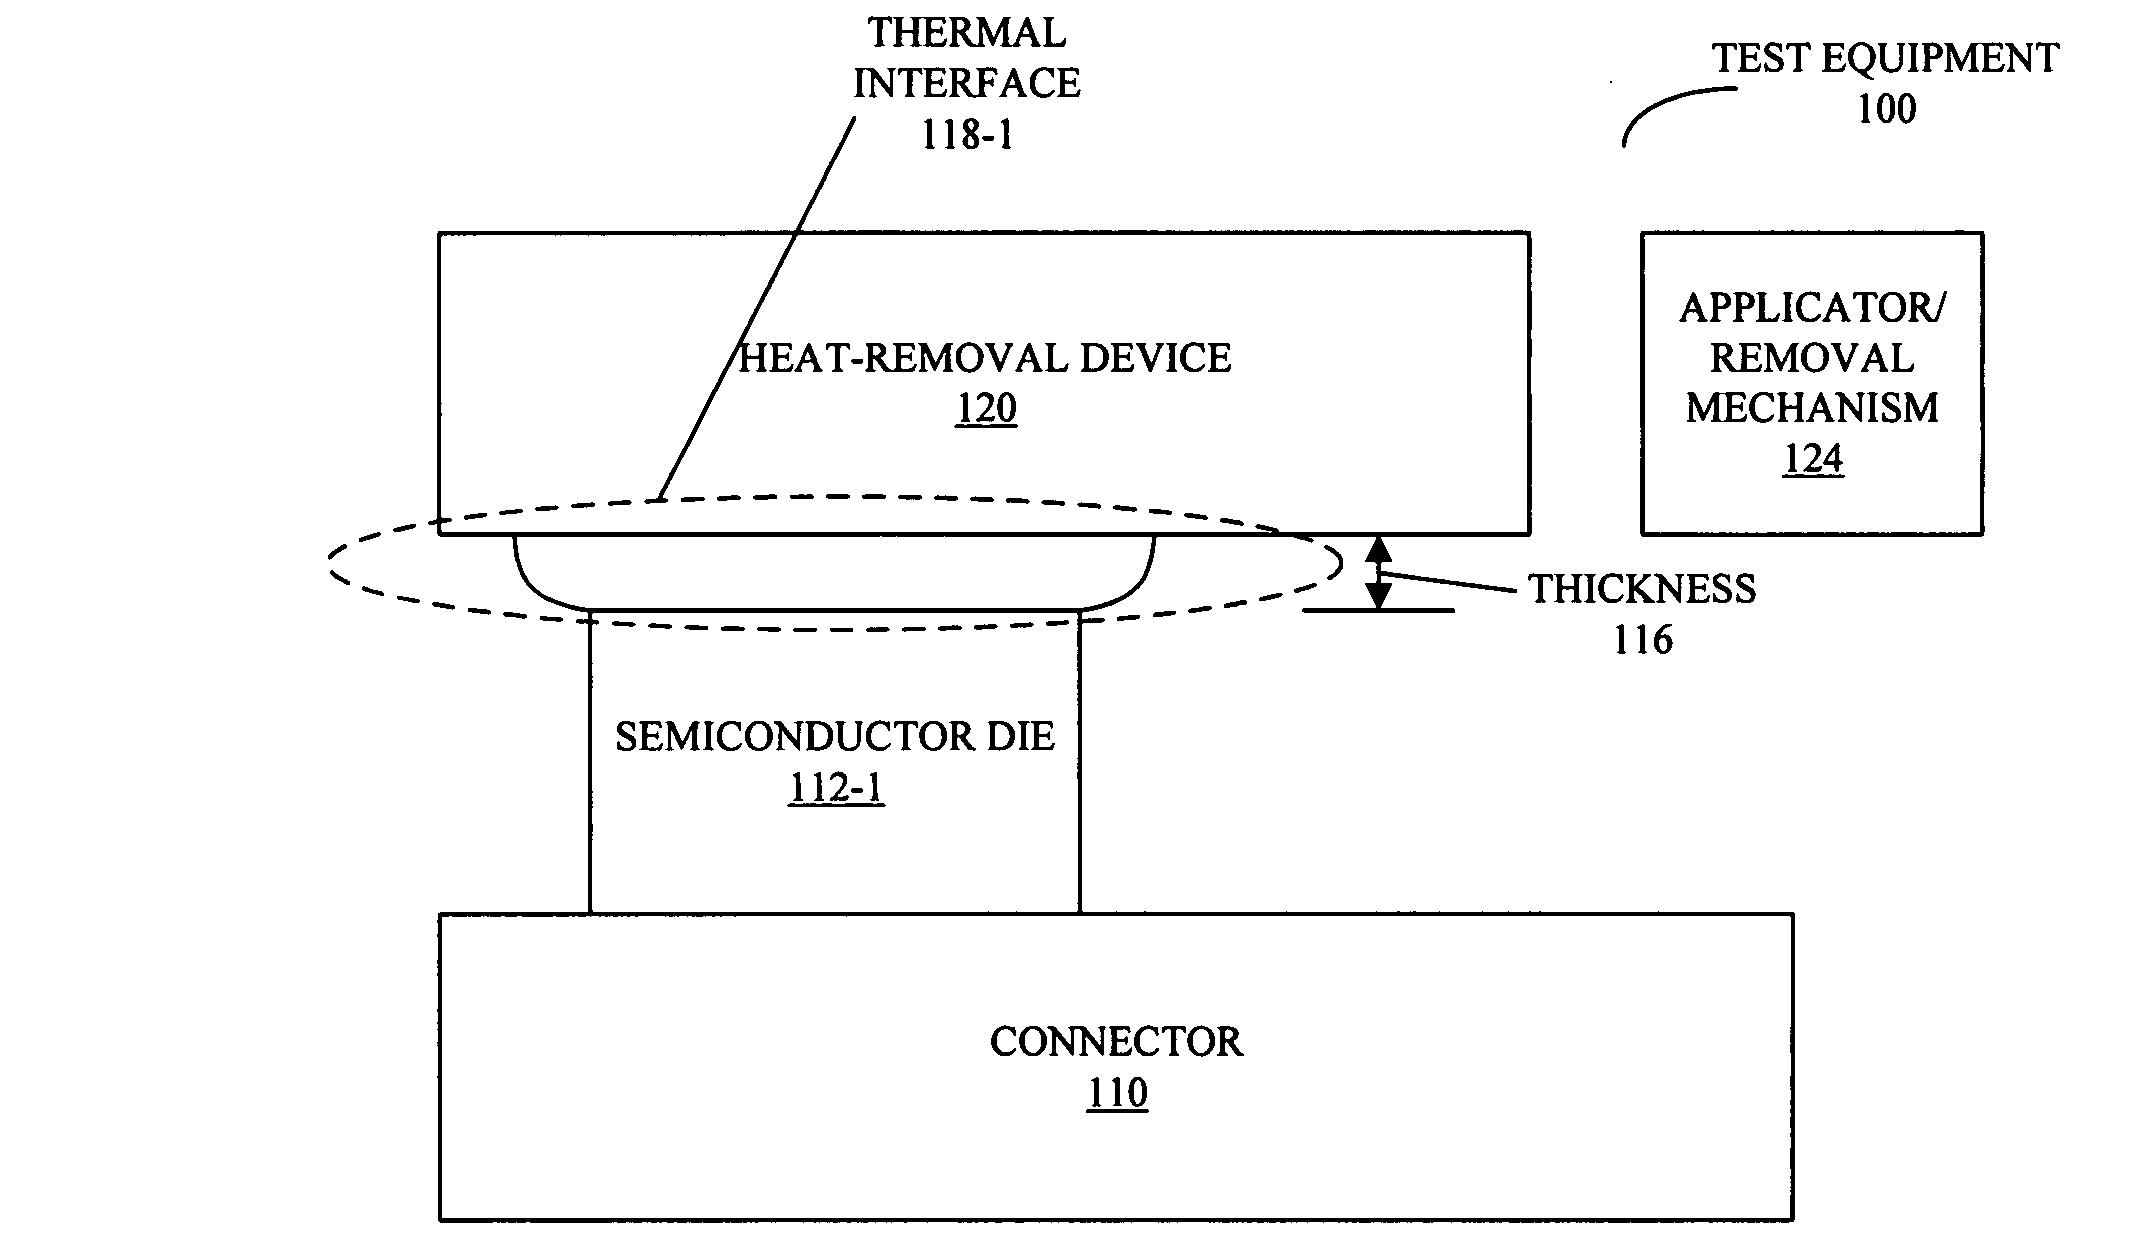 Thermal interface for electronic chip testing